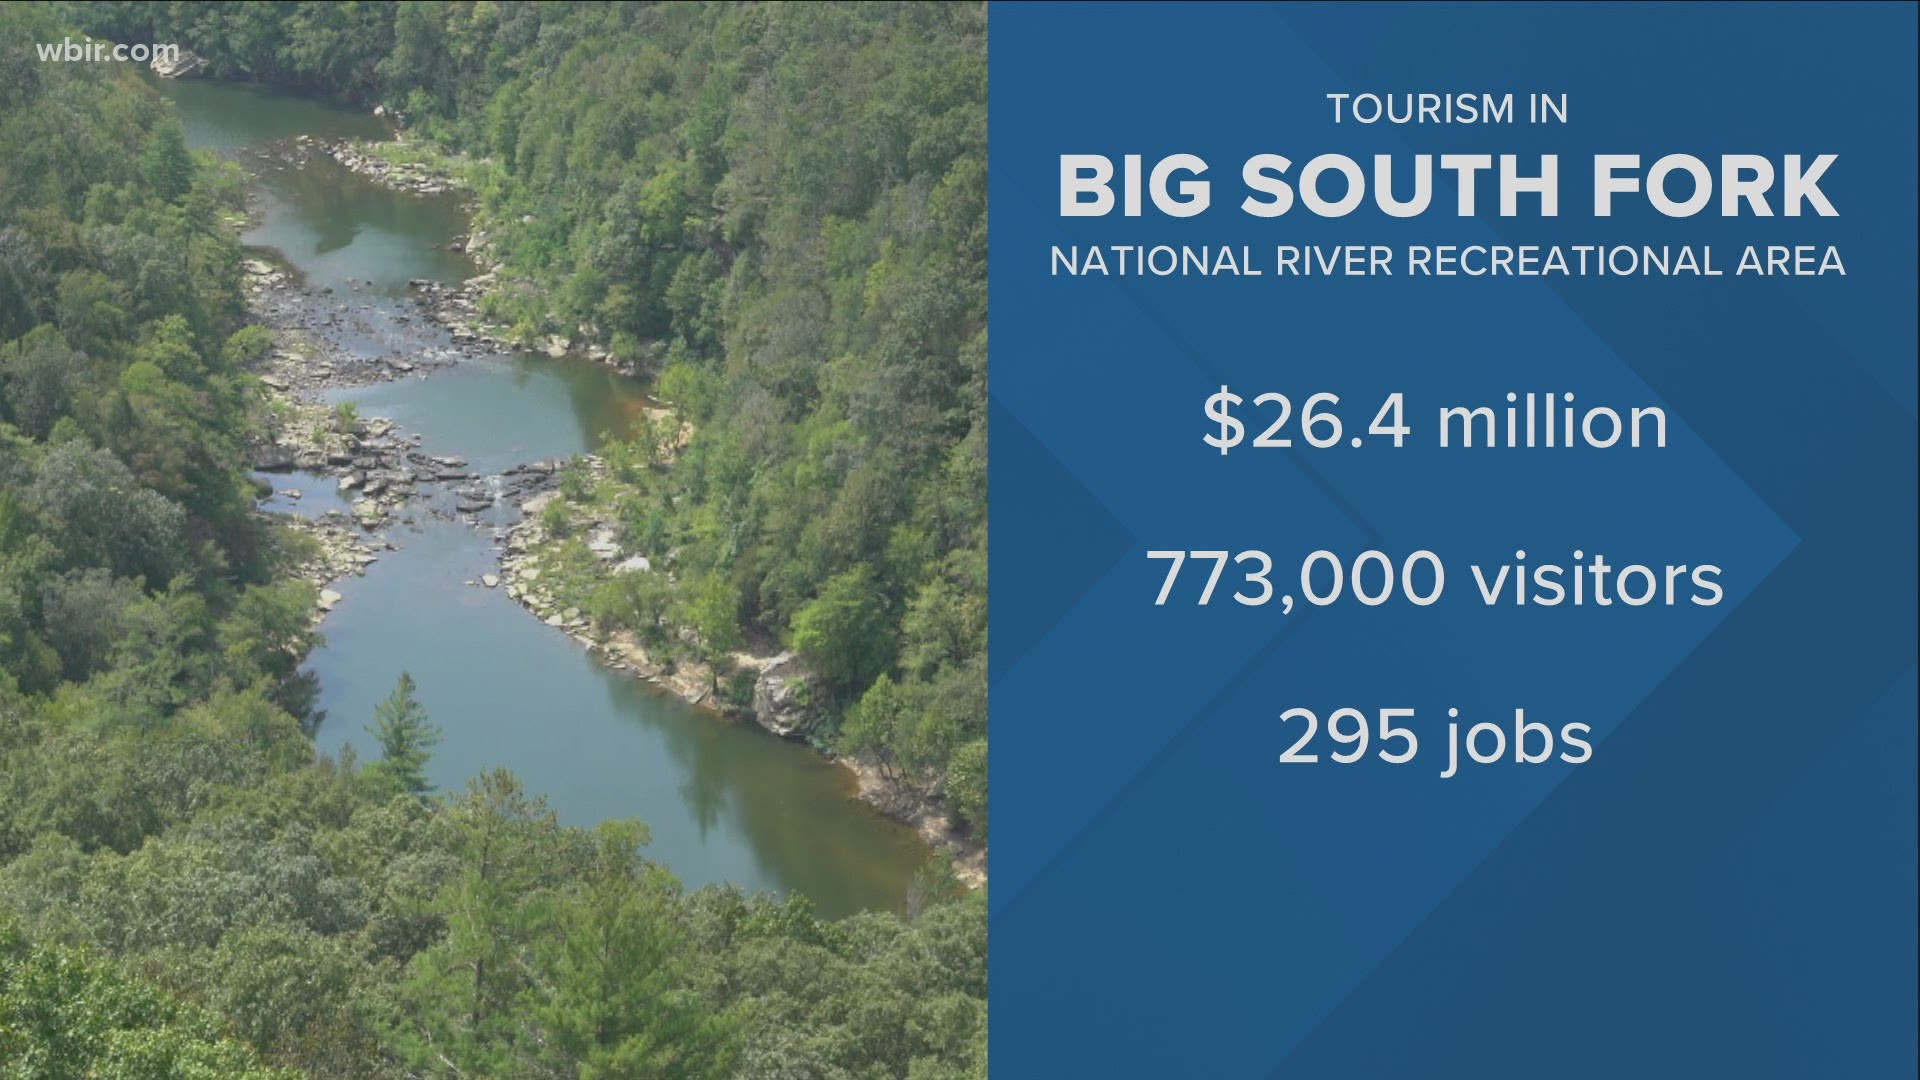 Tourism in Big South Fork brings big boost to East Tennessee's economy.